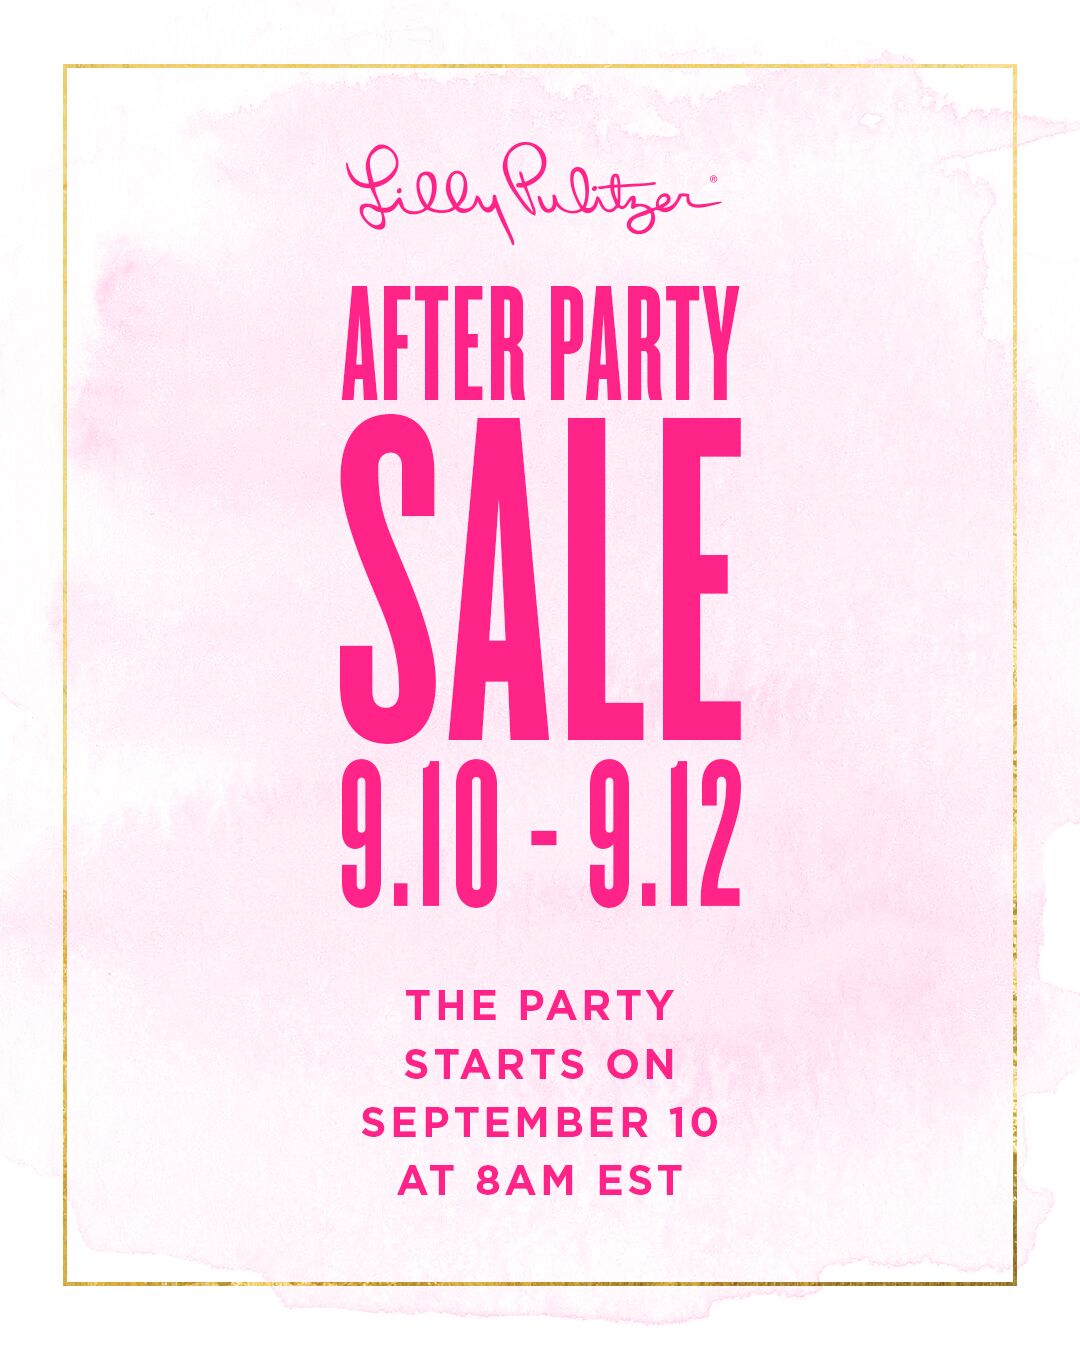 Lilly Pulitzer After Party Sale September 2018 Details, Lilly Pulitzer After Party Sale Dates, September Lilly Pulitzer After Party Sale, Mark Your Calendars: 2018 Lilly Pulitzer After Party Sale Details by southern style blogger Stephanie Ziajka from Diary of a Debutante